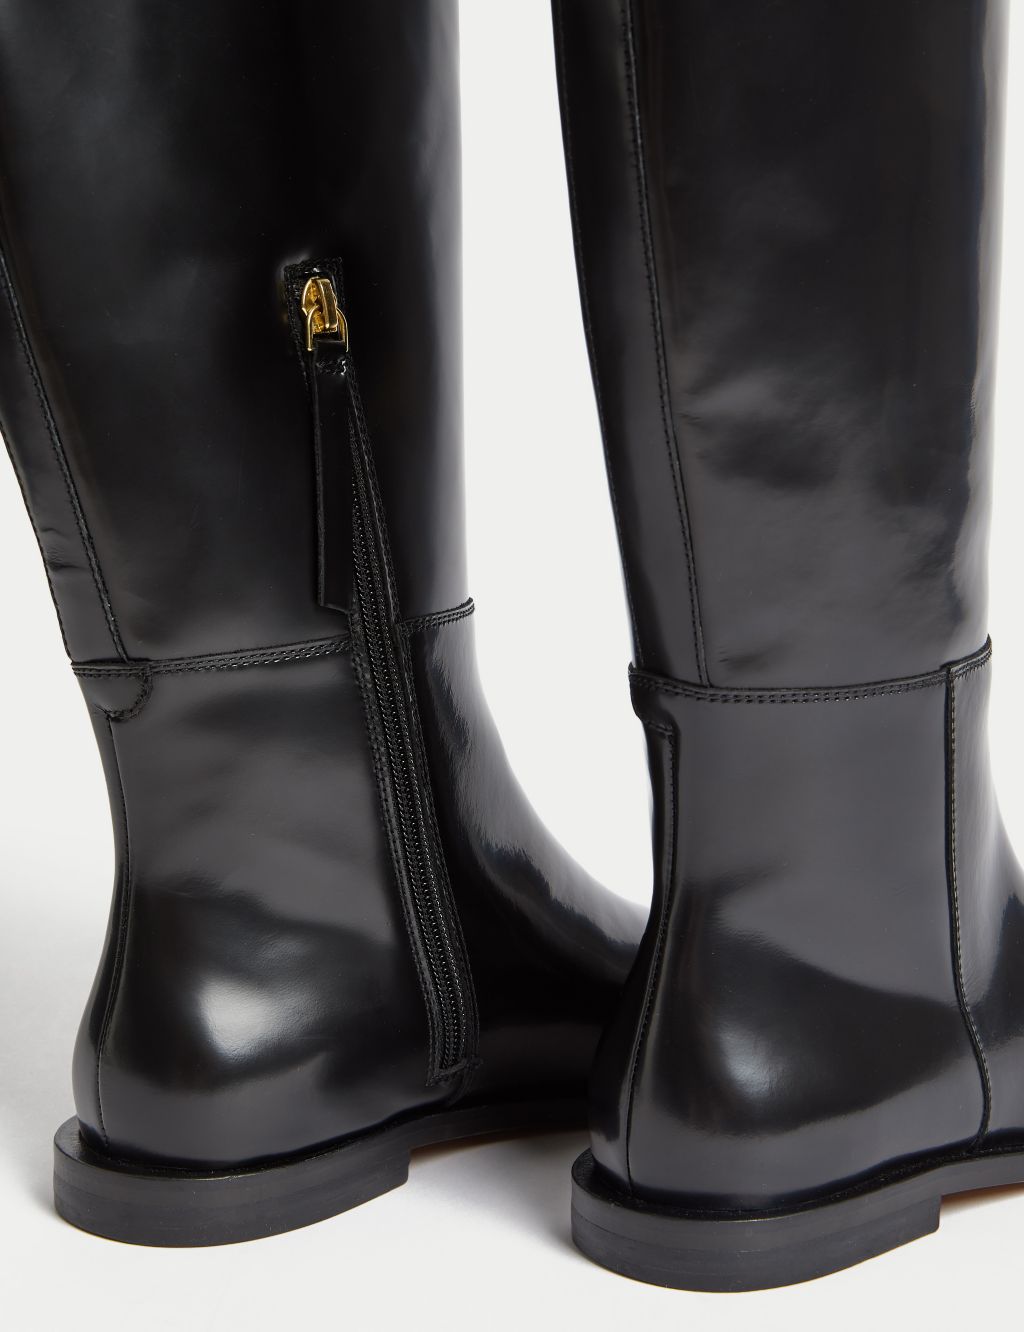 Patent Leather Flat Riding Boots image 3